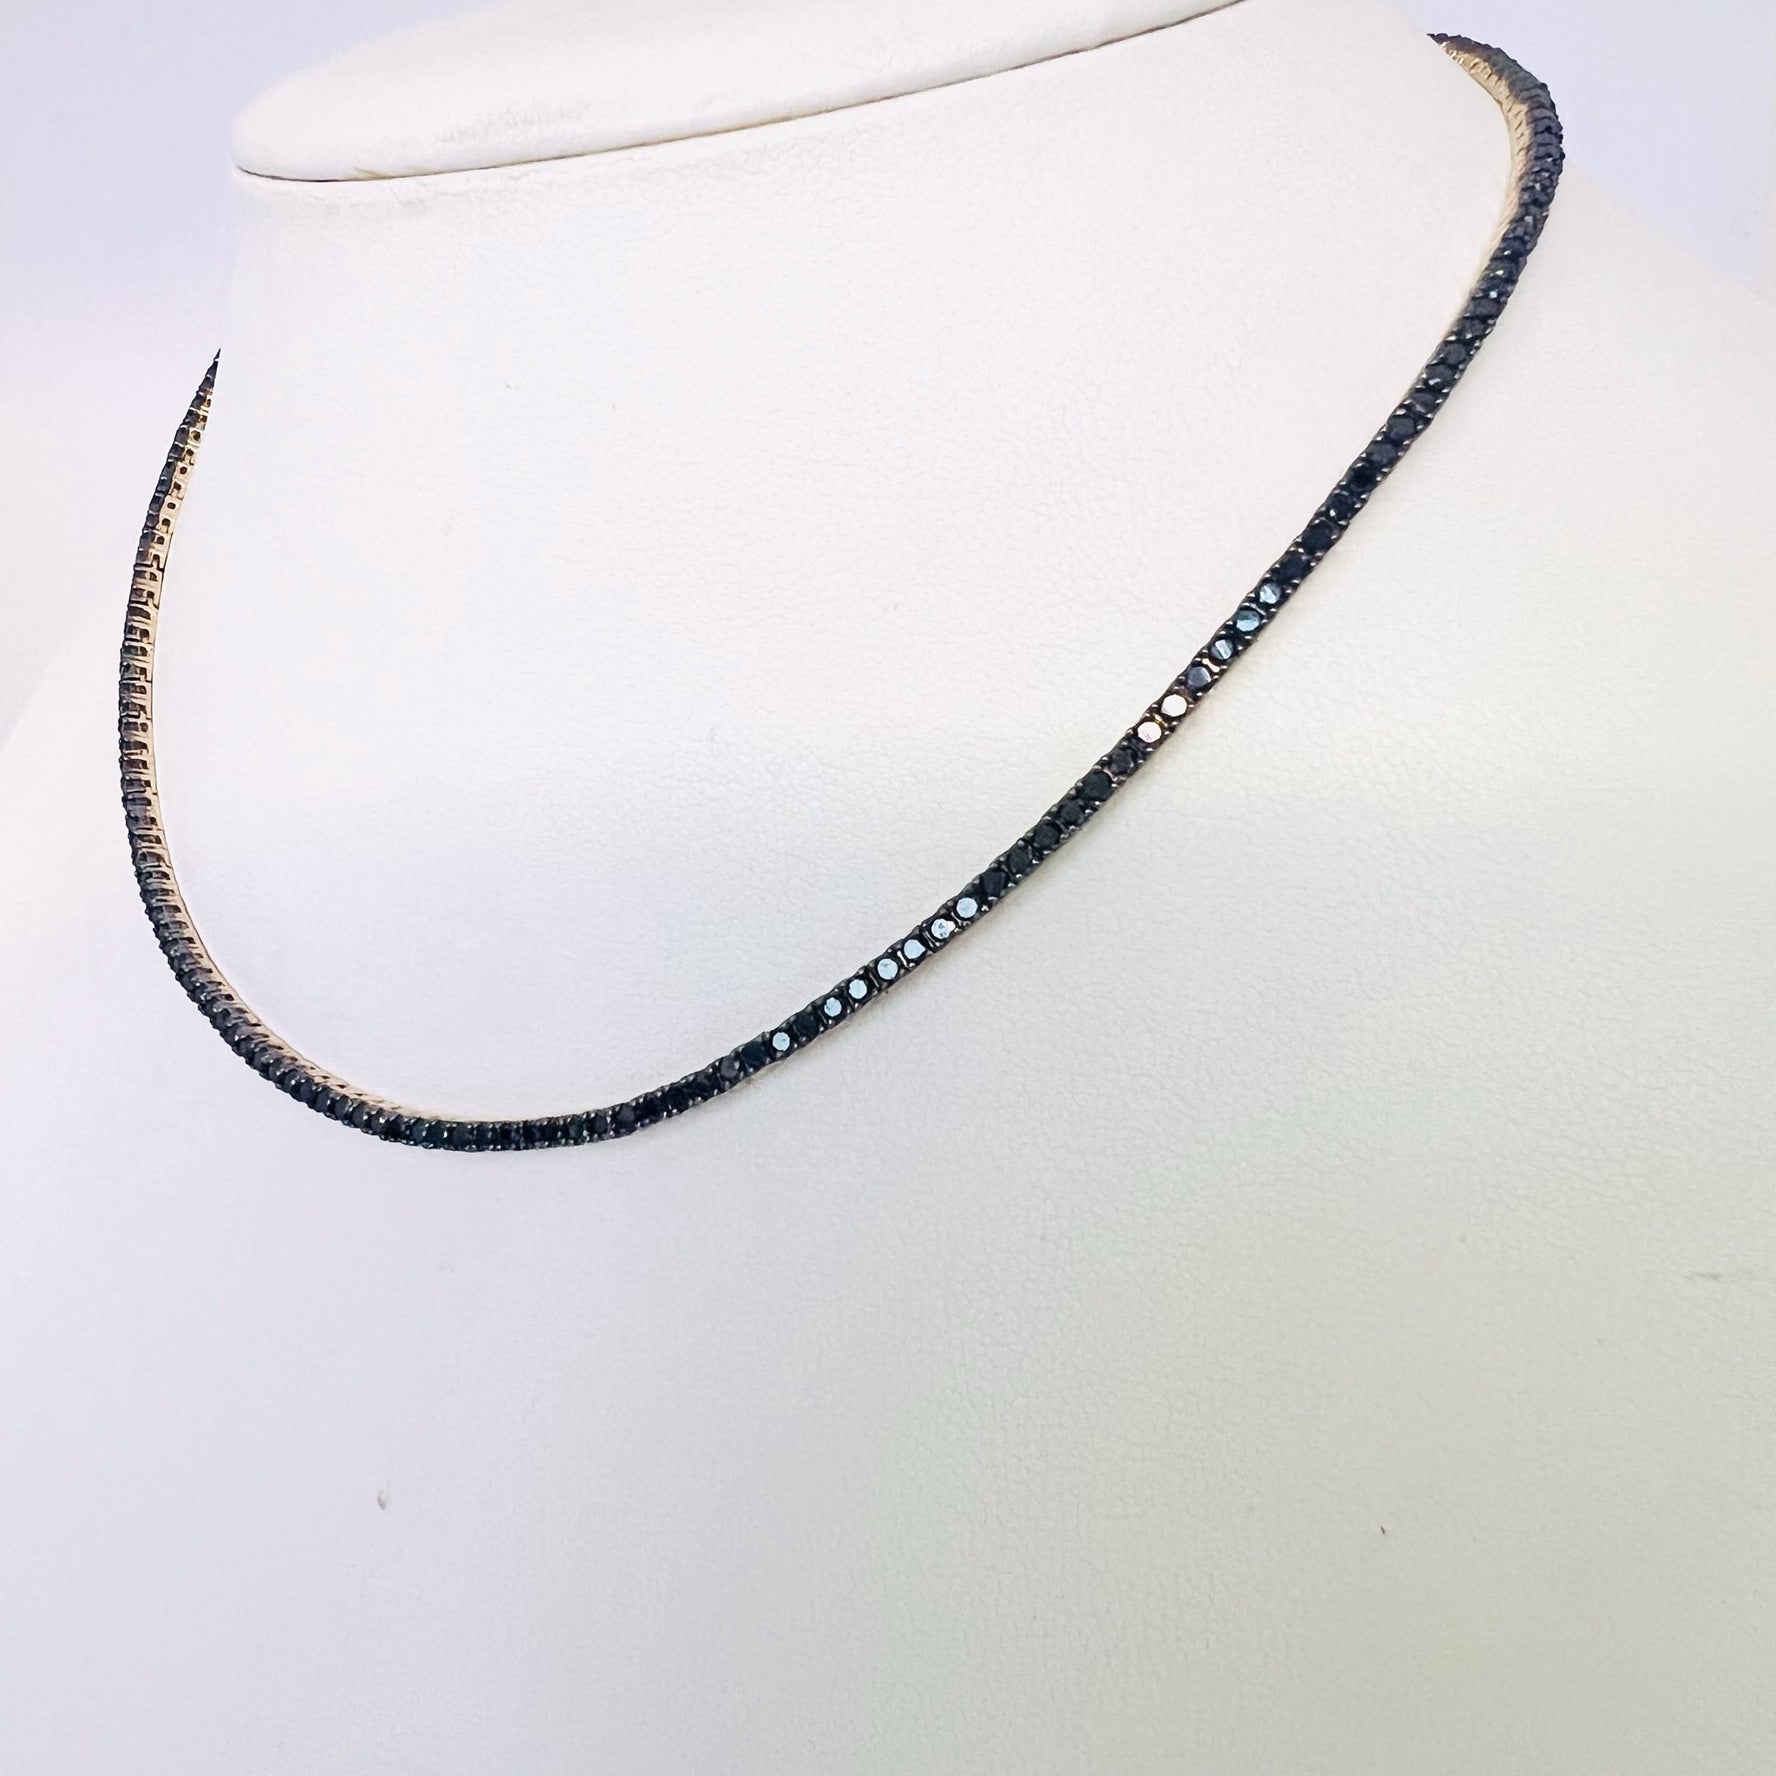 14k gold and black diamond tennis necklace